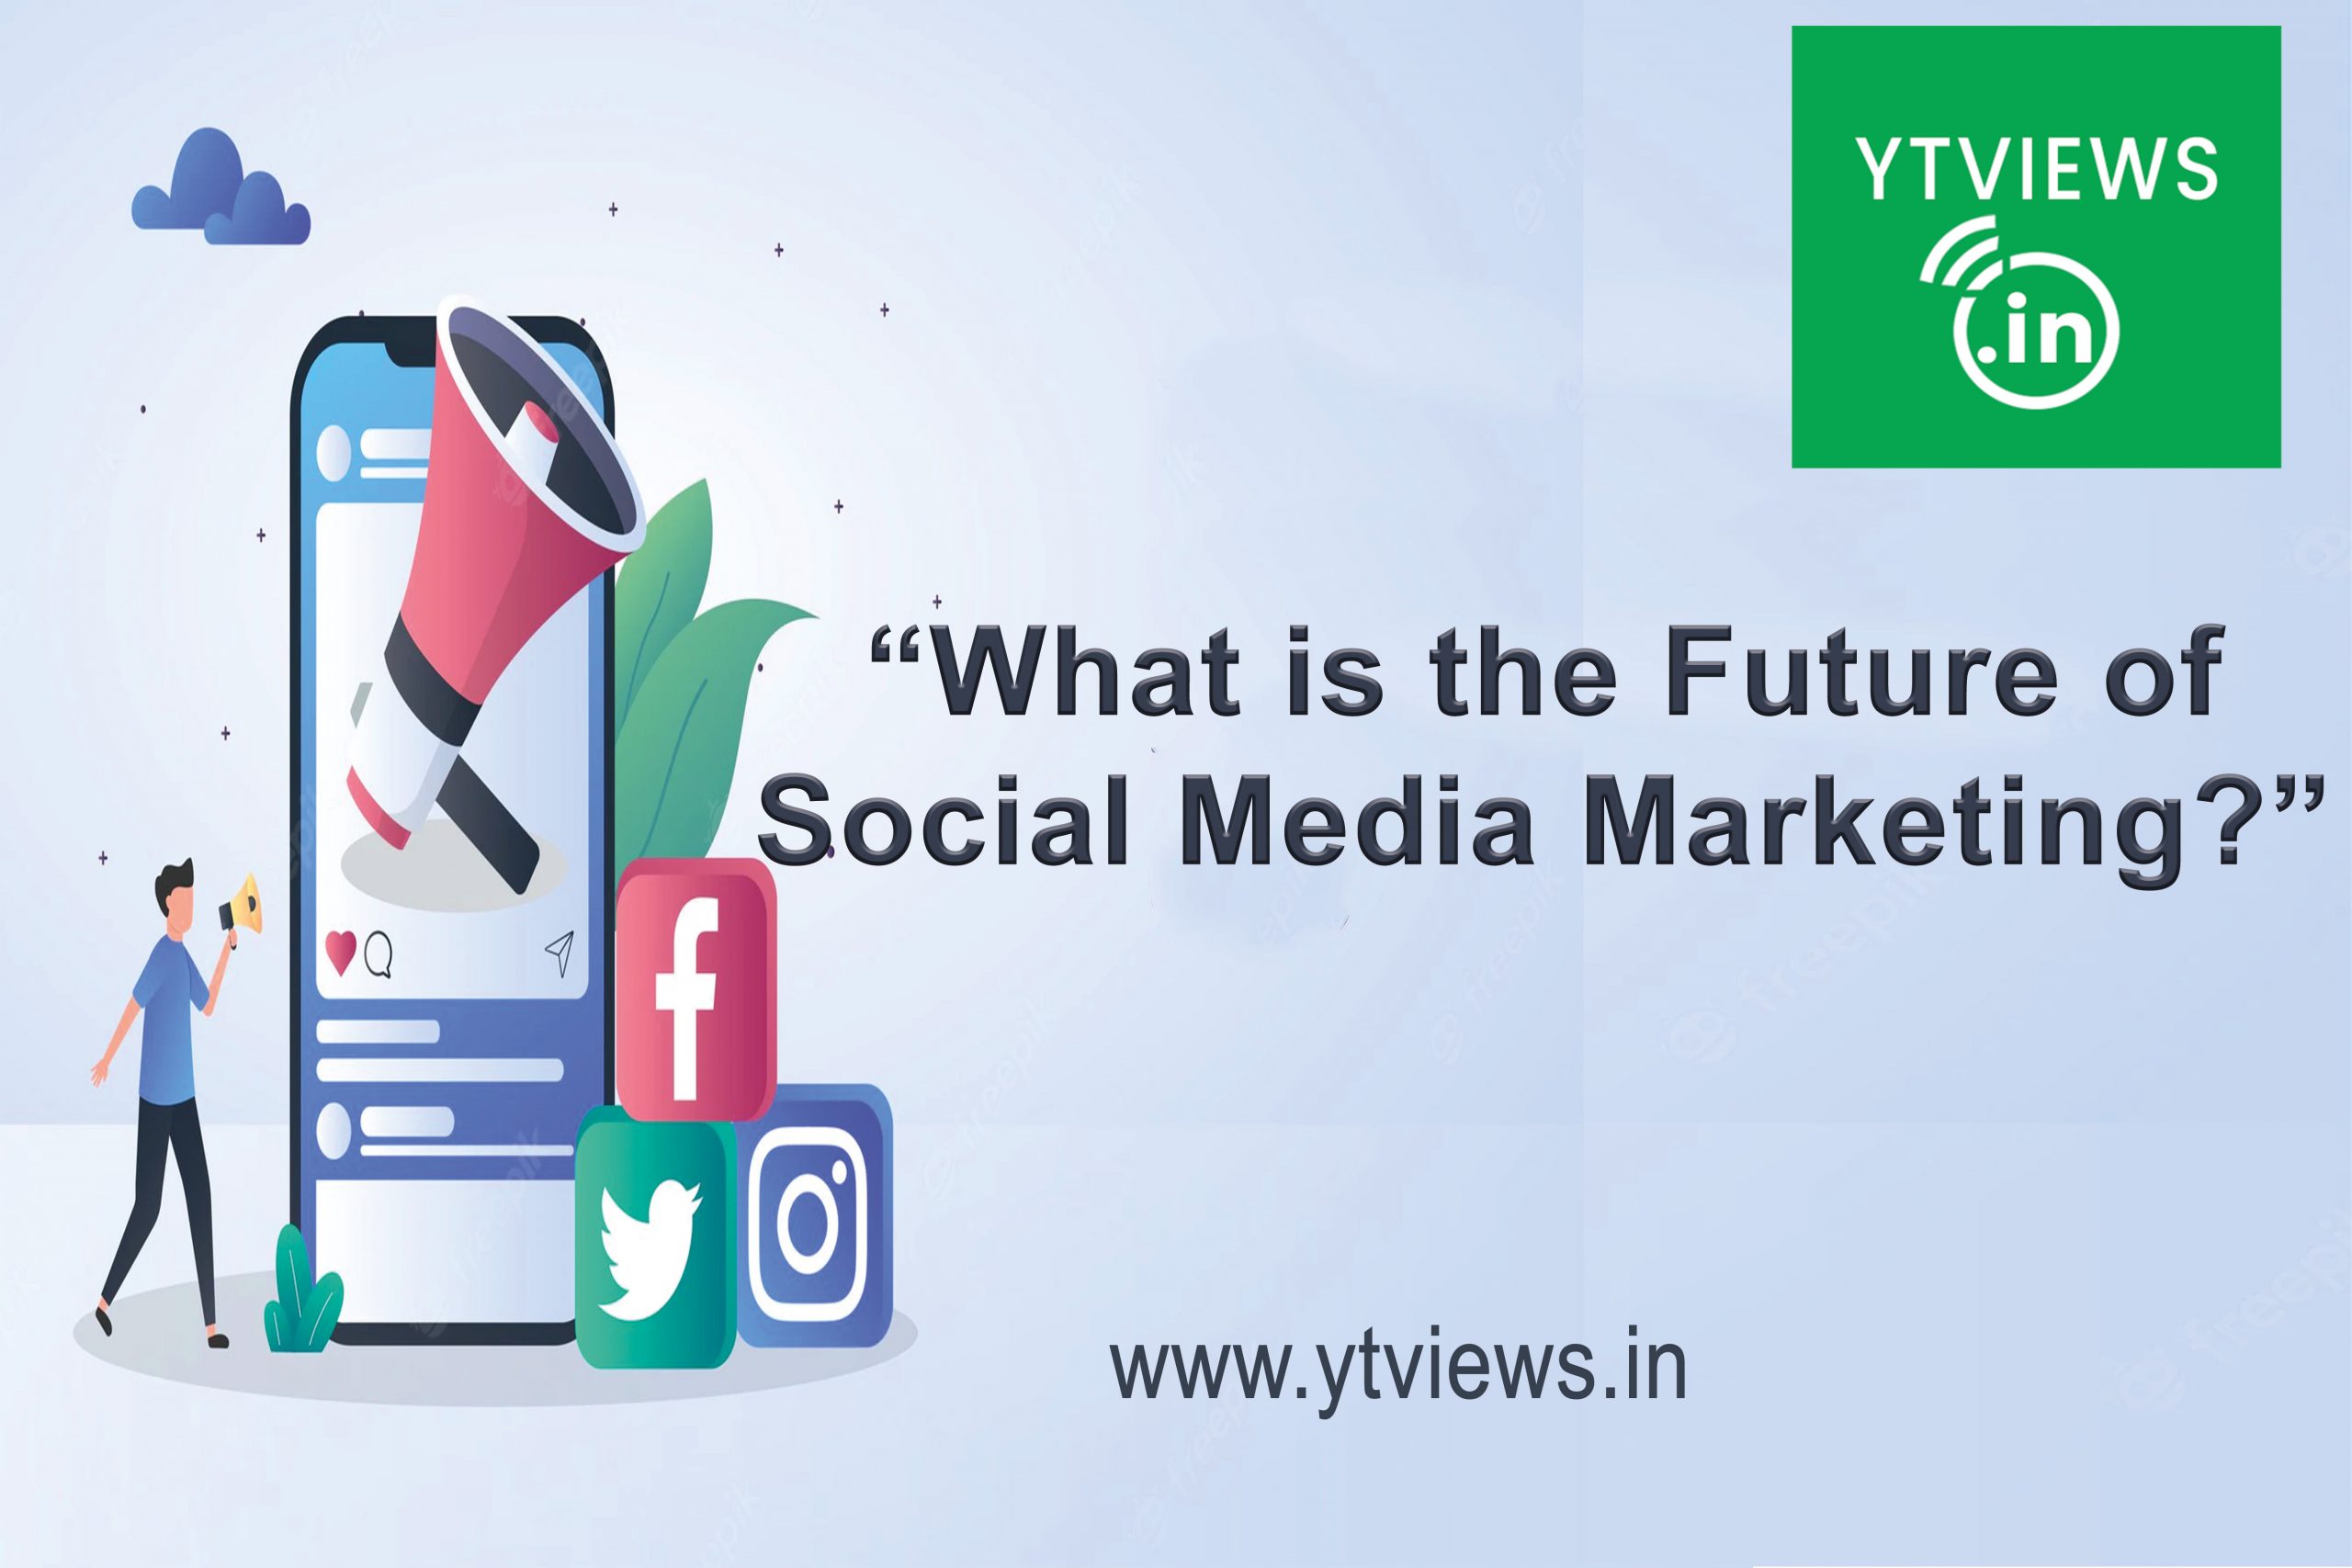 What is the Future of Social Media Marketing?